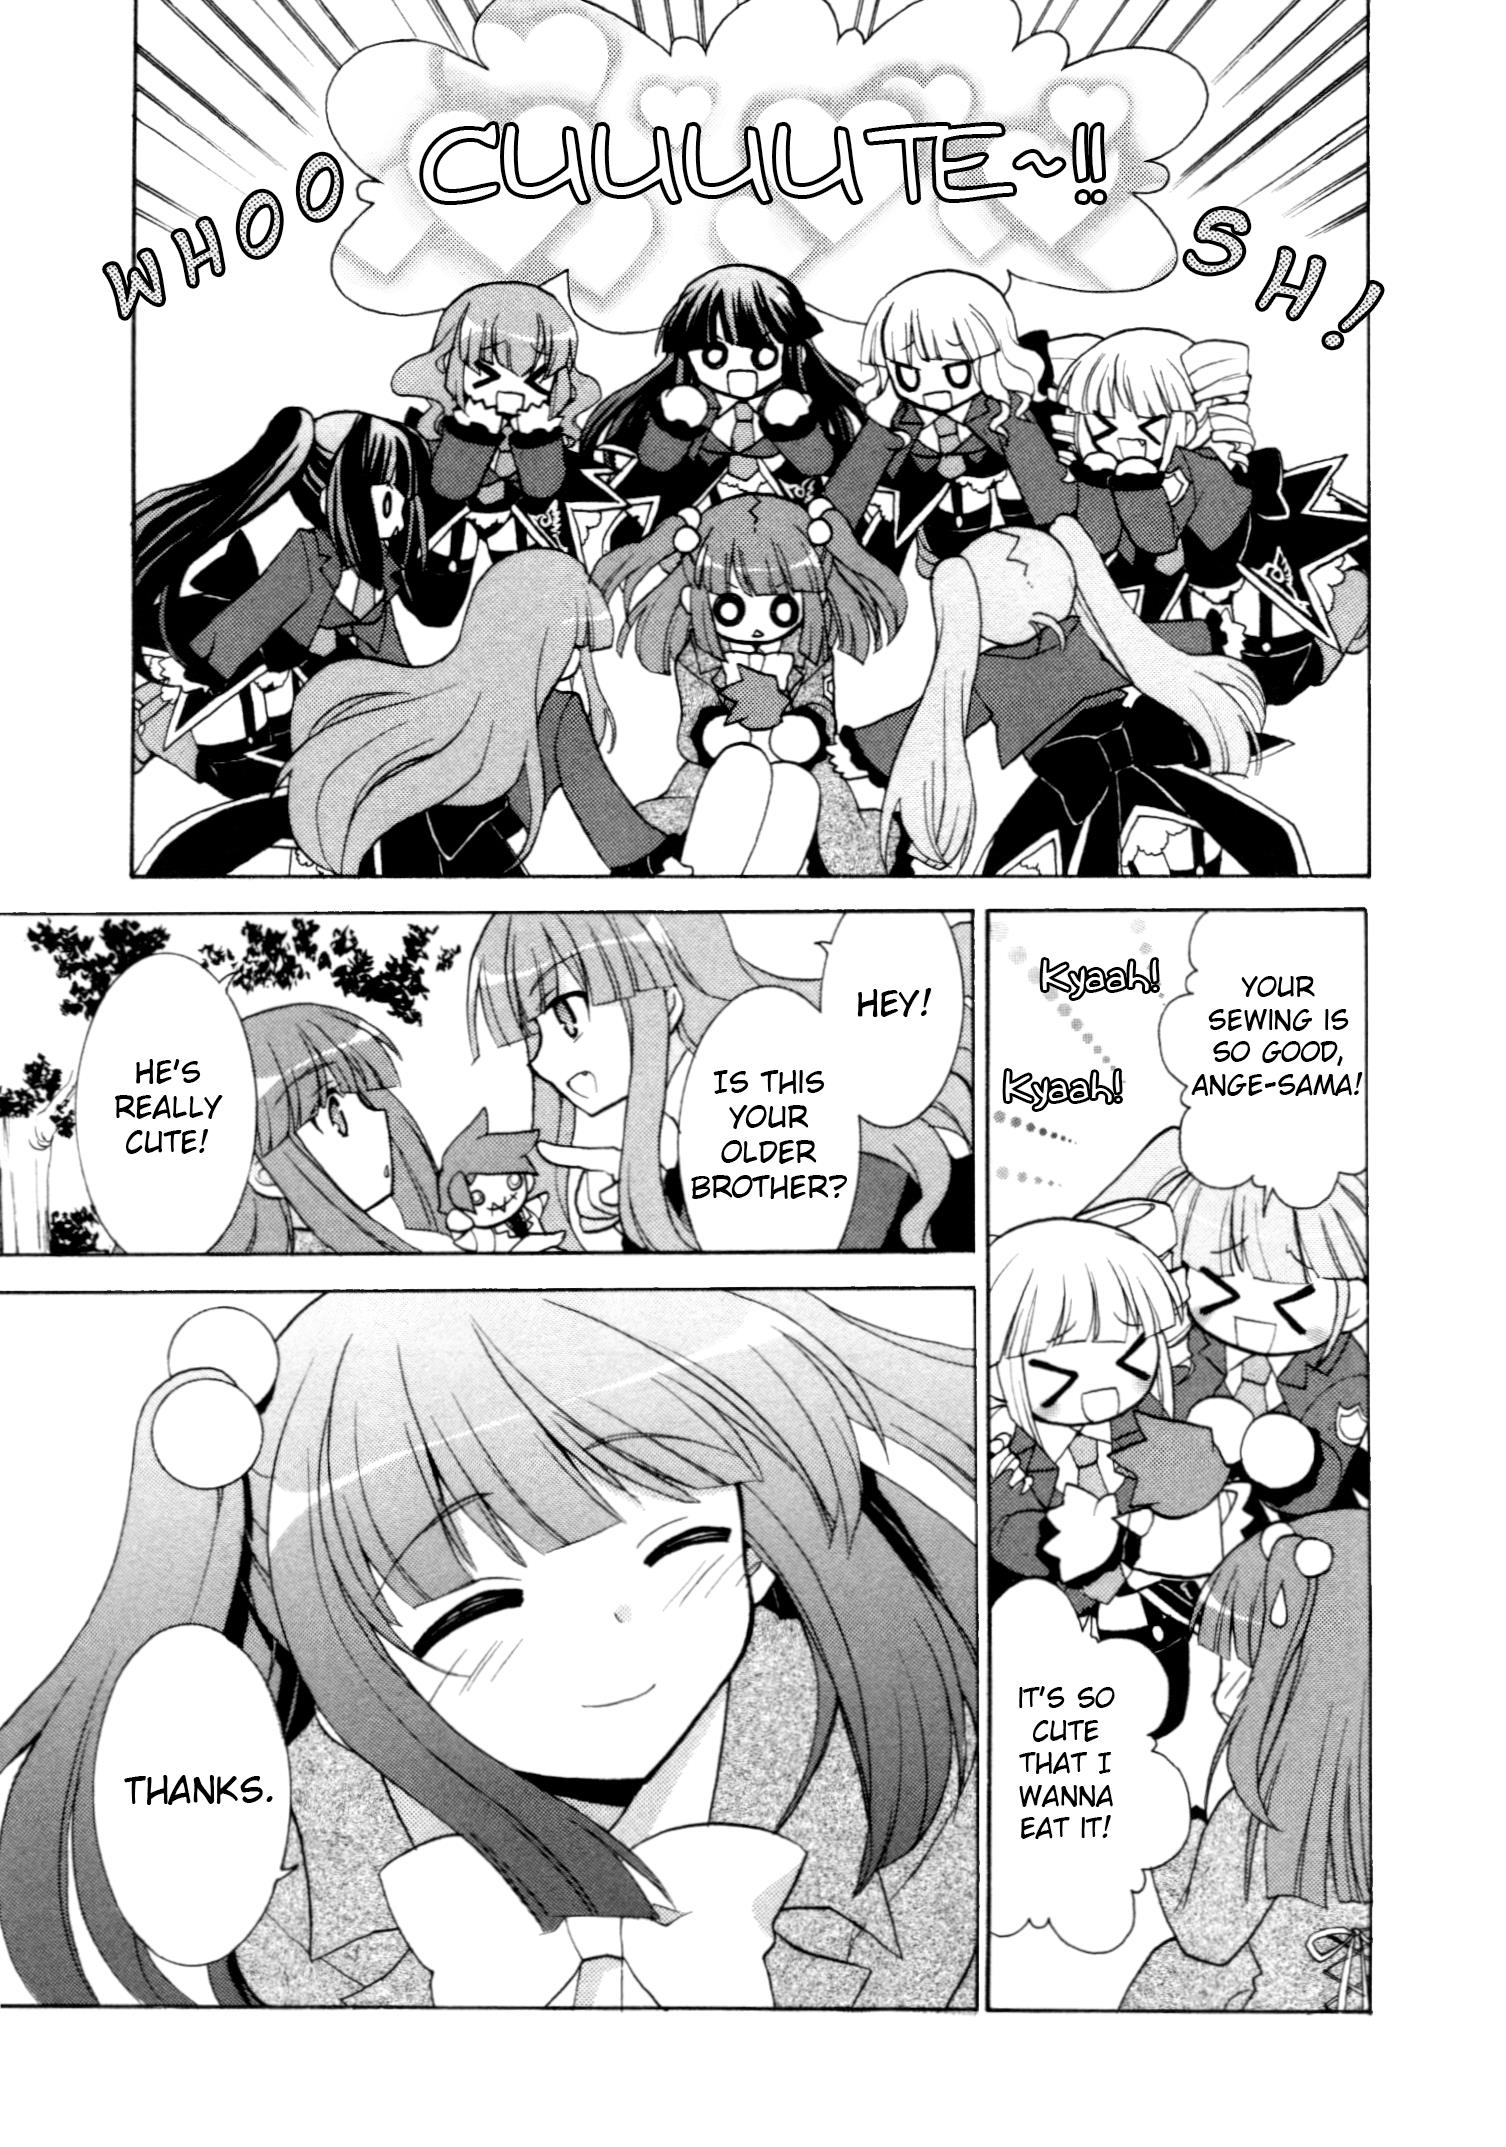 Umineko When They Cry Episode Collection Vol.2 Chapter 13: See You Again (By Haruka Hano) - Picture 3